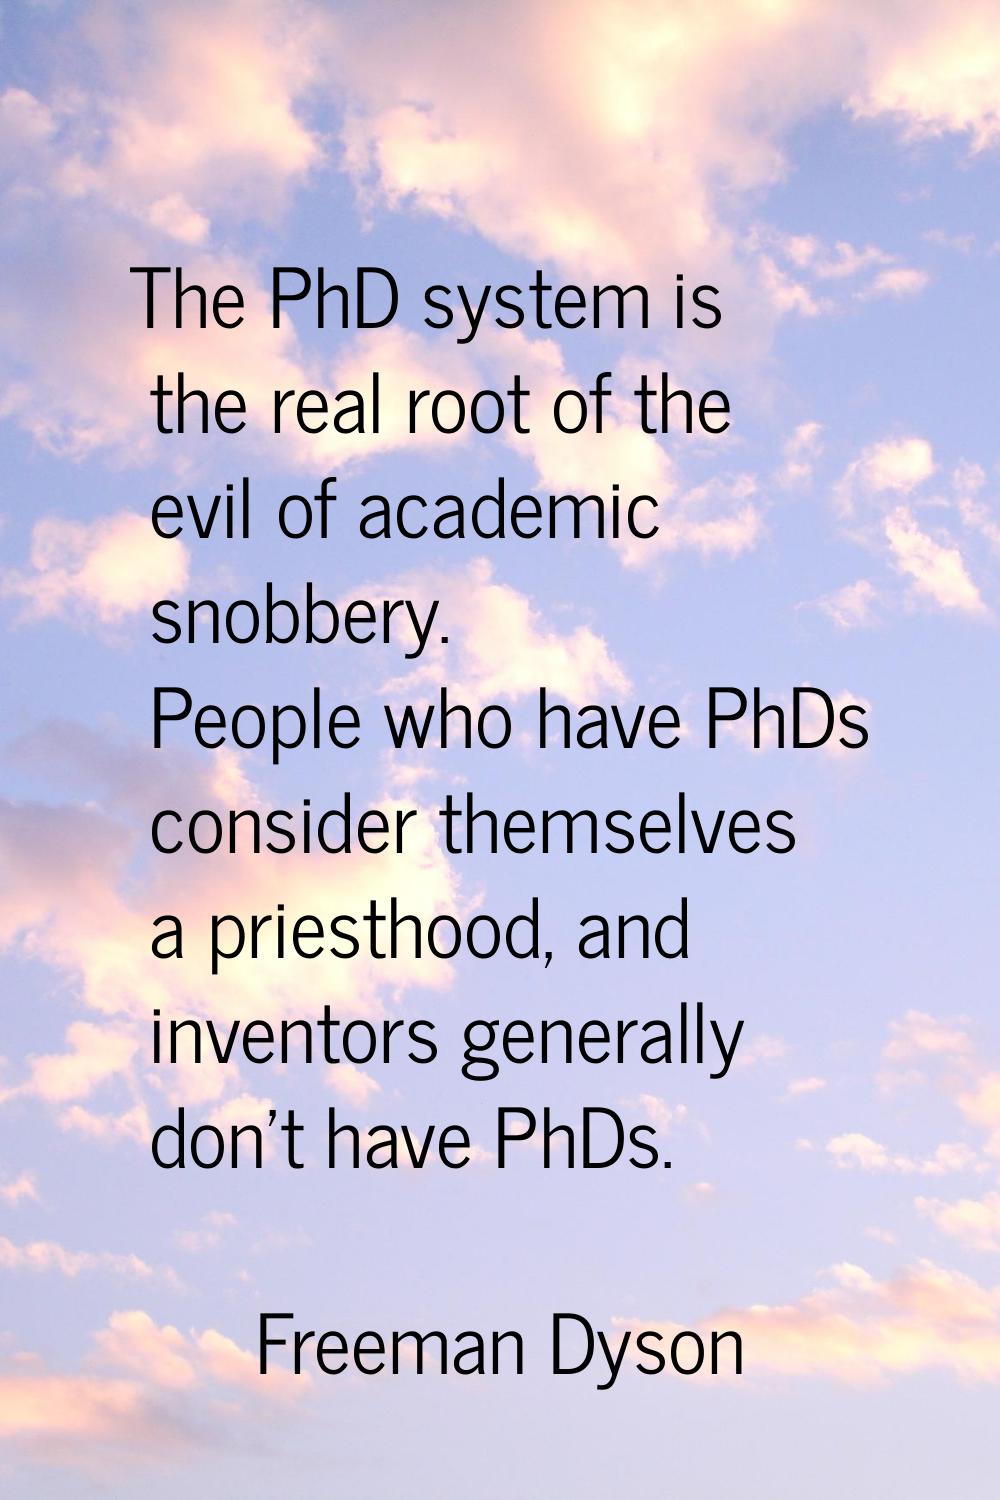 The PhD system is the real root of the evil of academic snobbery. People who have PhDs consider the